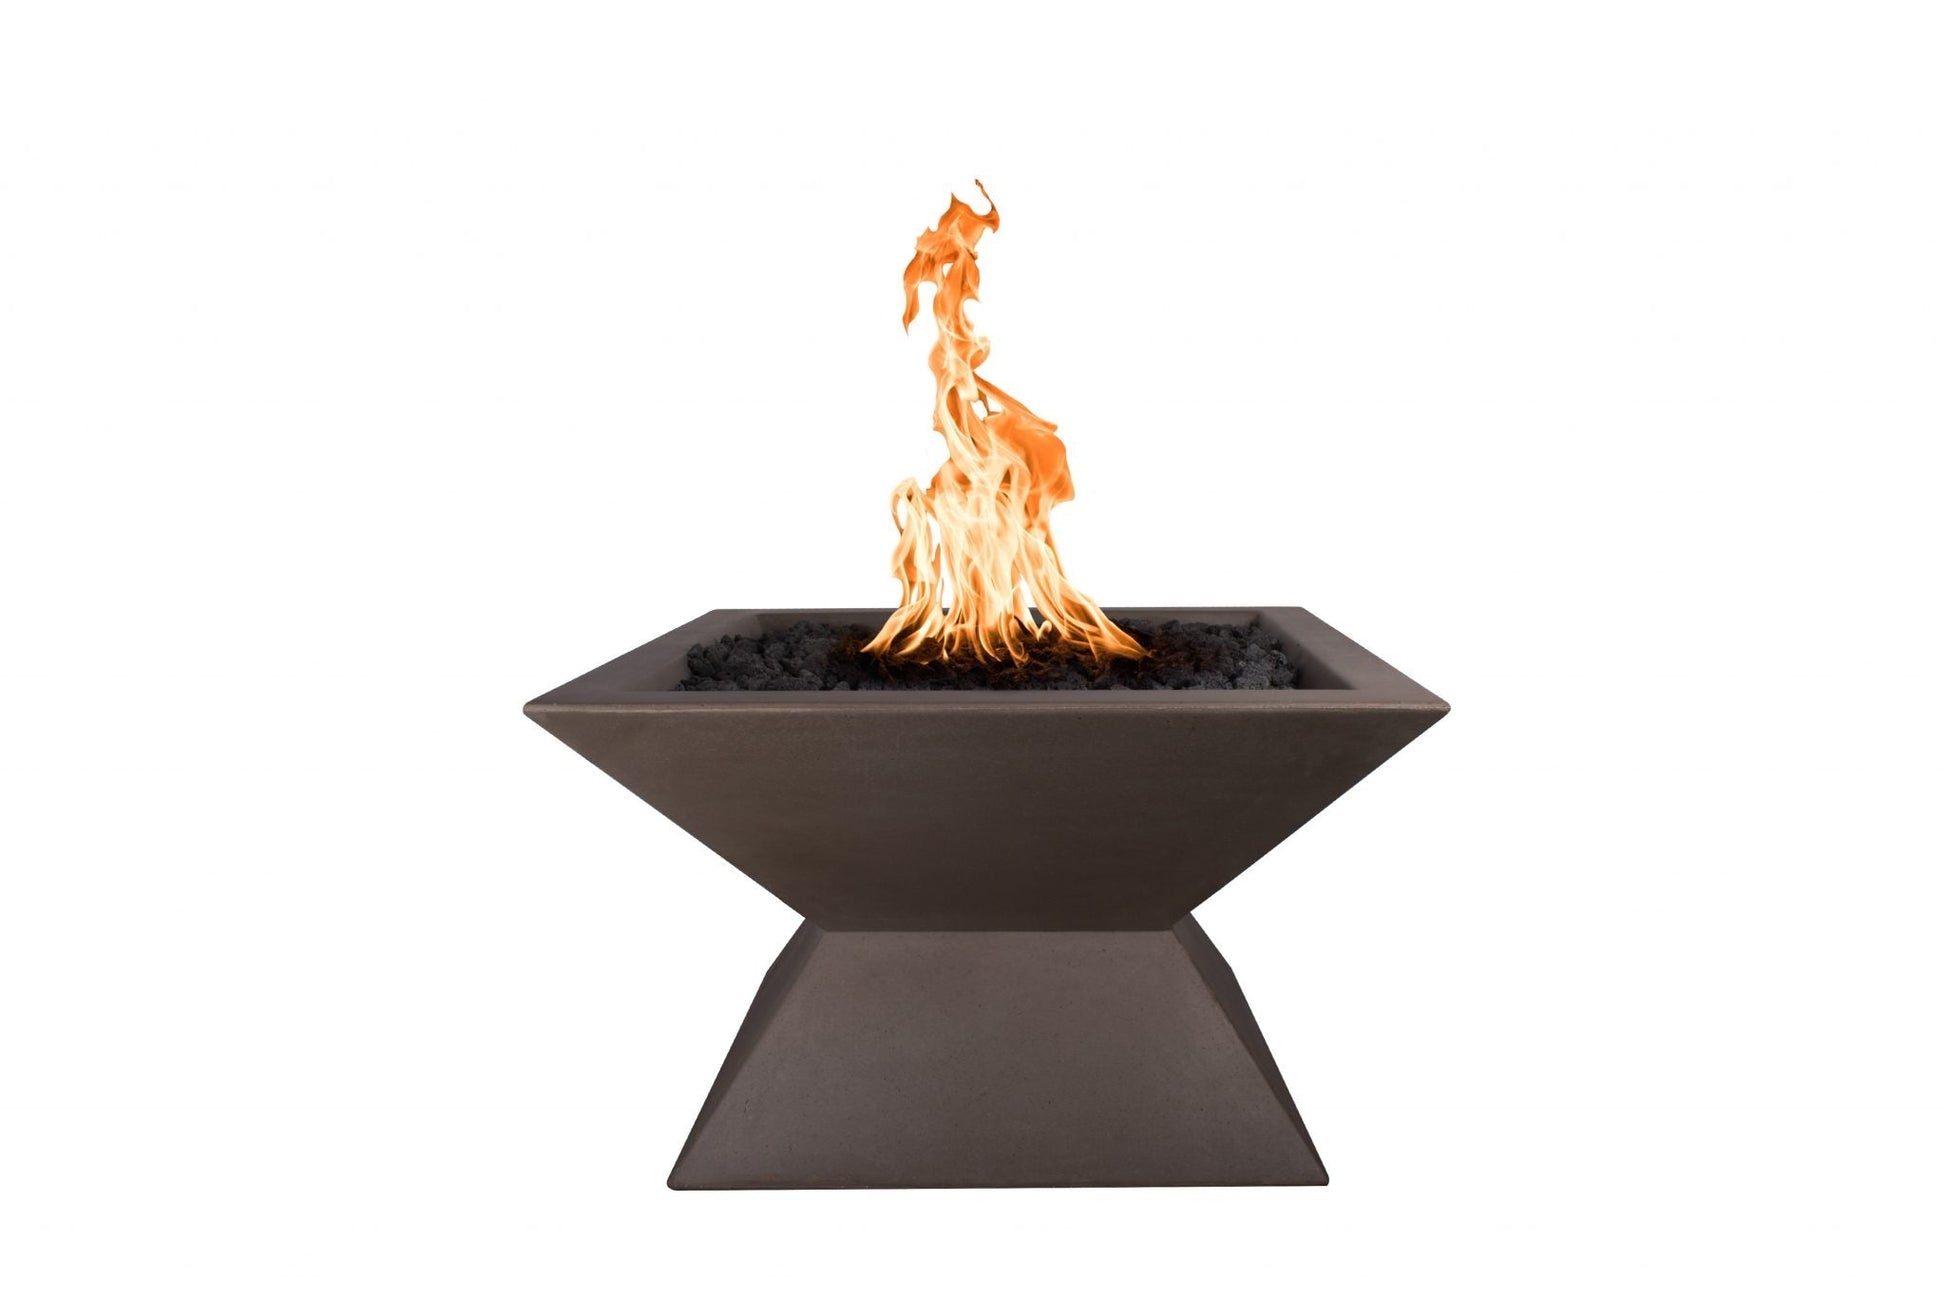 The Outdoor Plus Square Uxmal 30" White GFRC Concrete Liquid Propane Fire Pit with 12V Electronic Ignition